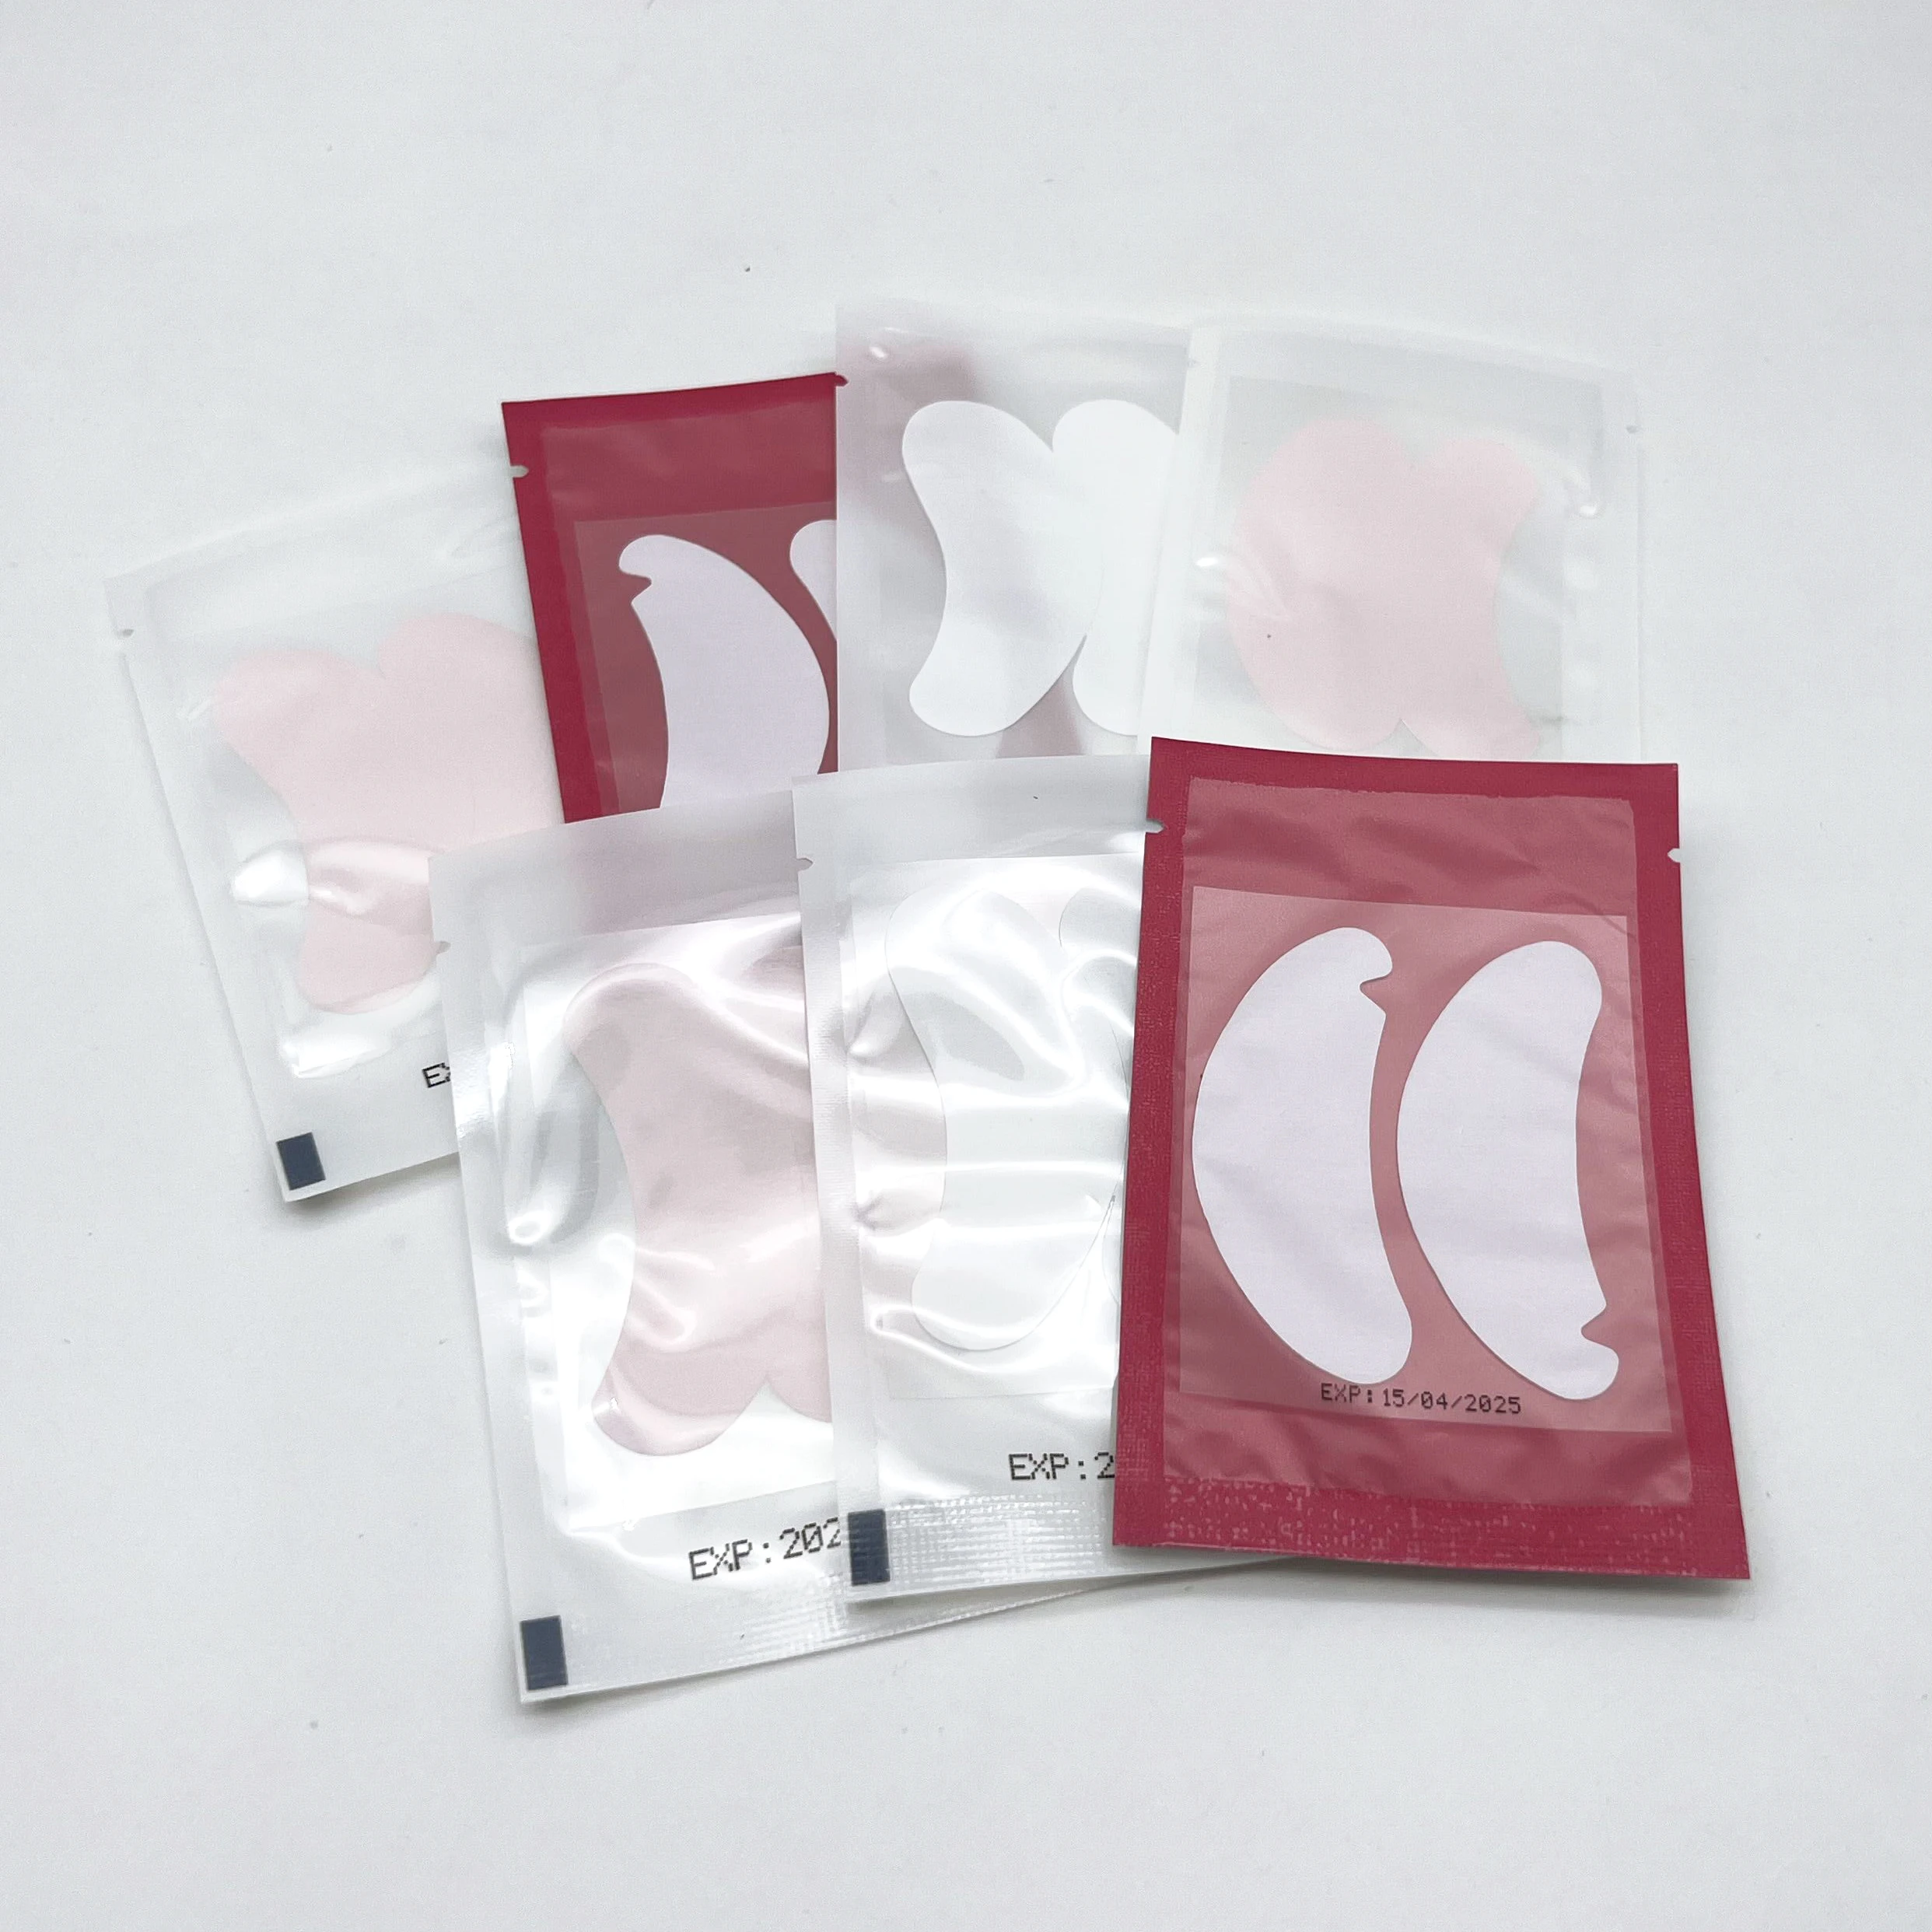 

New style Thin Material Smooth Bright White Eye Patch For Eyelash Extension collagen under eye patches Bio gel eye pads